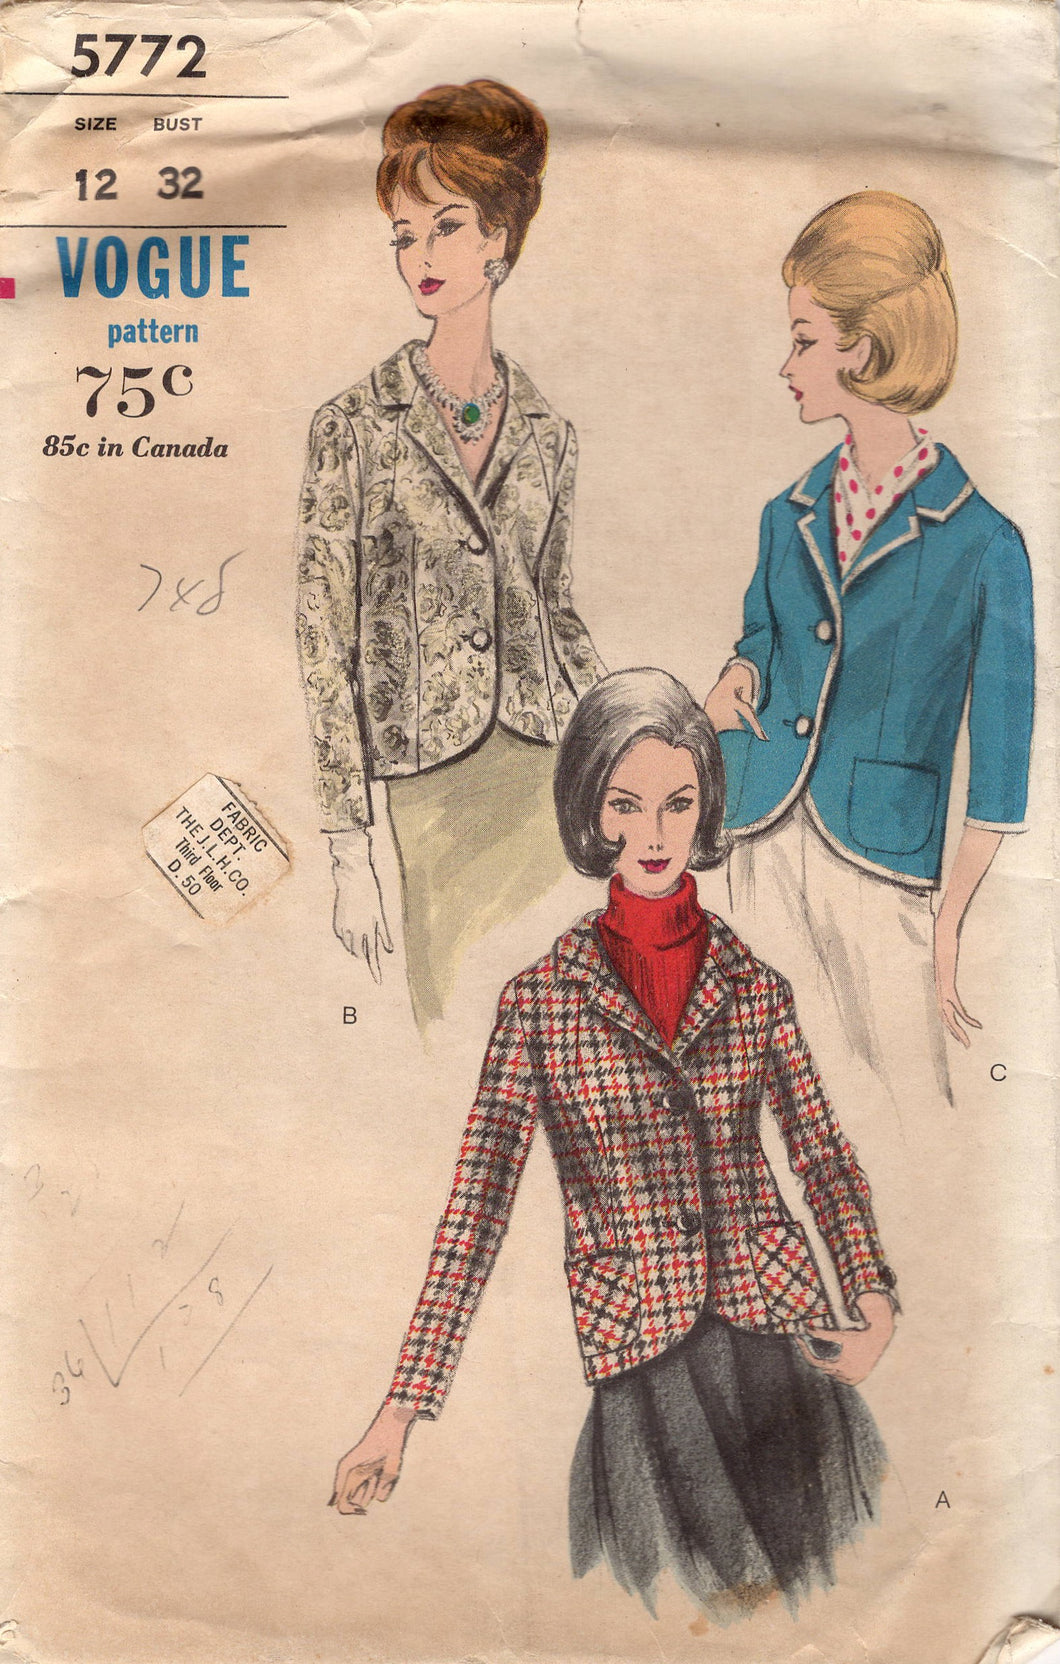 1960's Vogue Jacket with Pockets Pattern - Bust 32